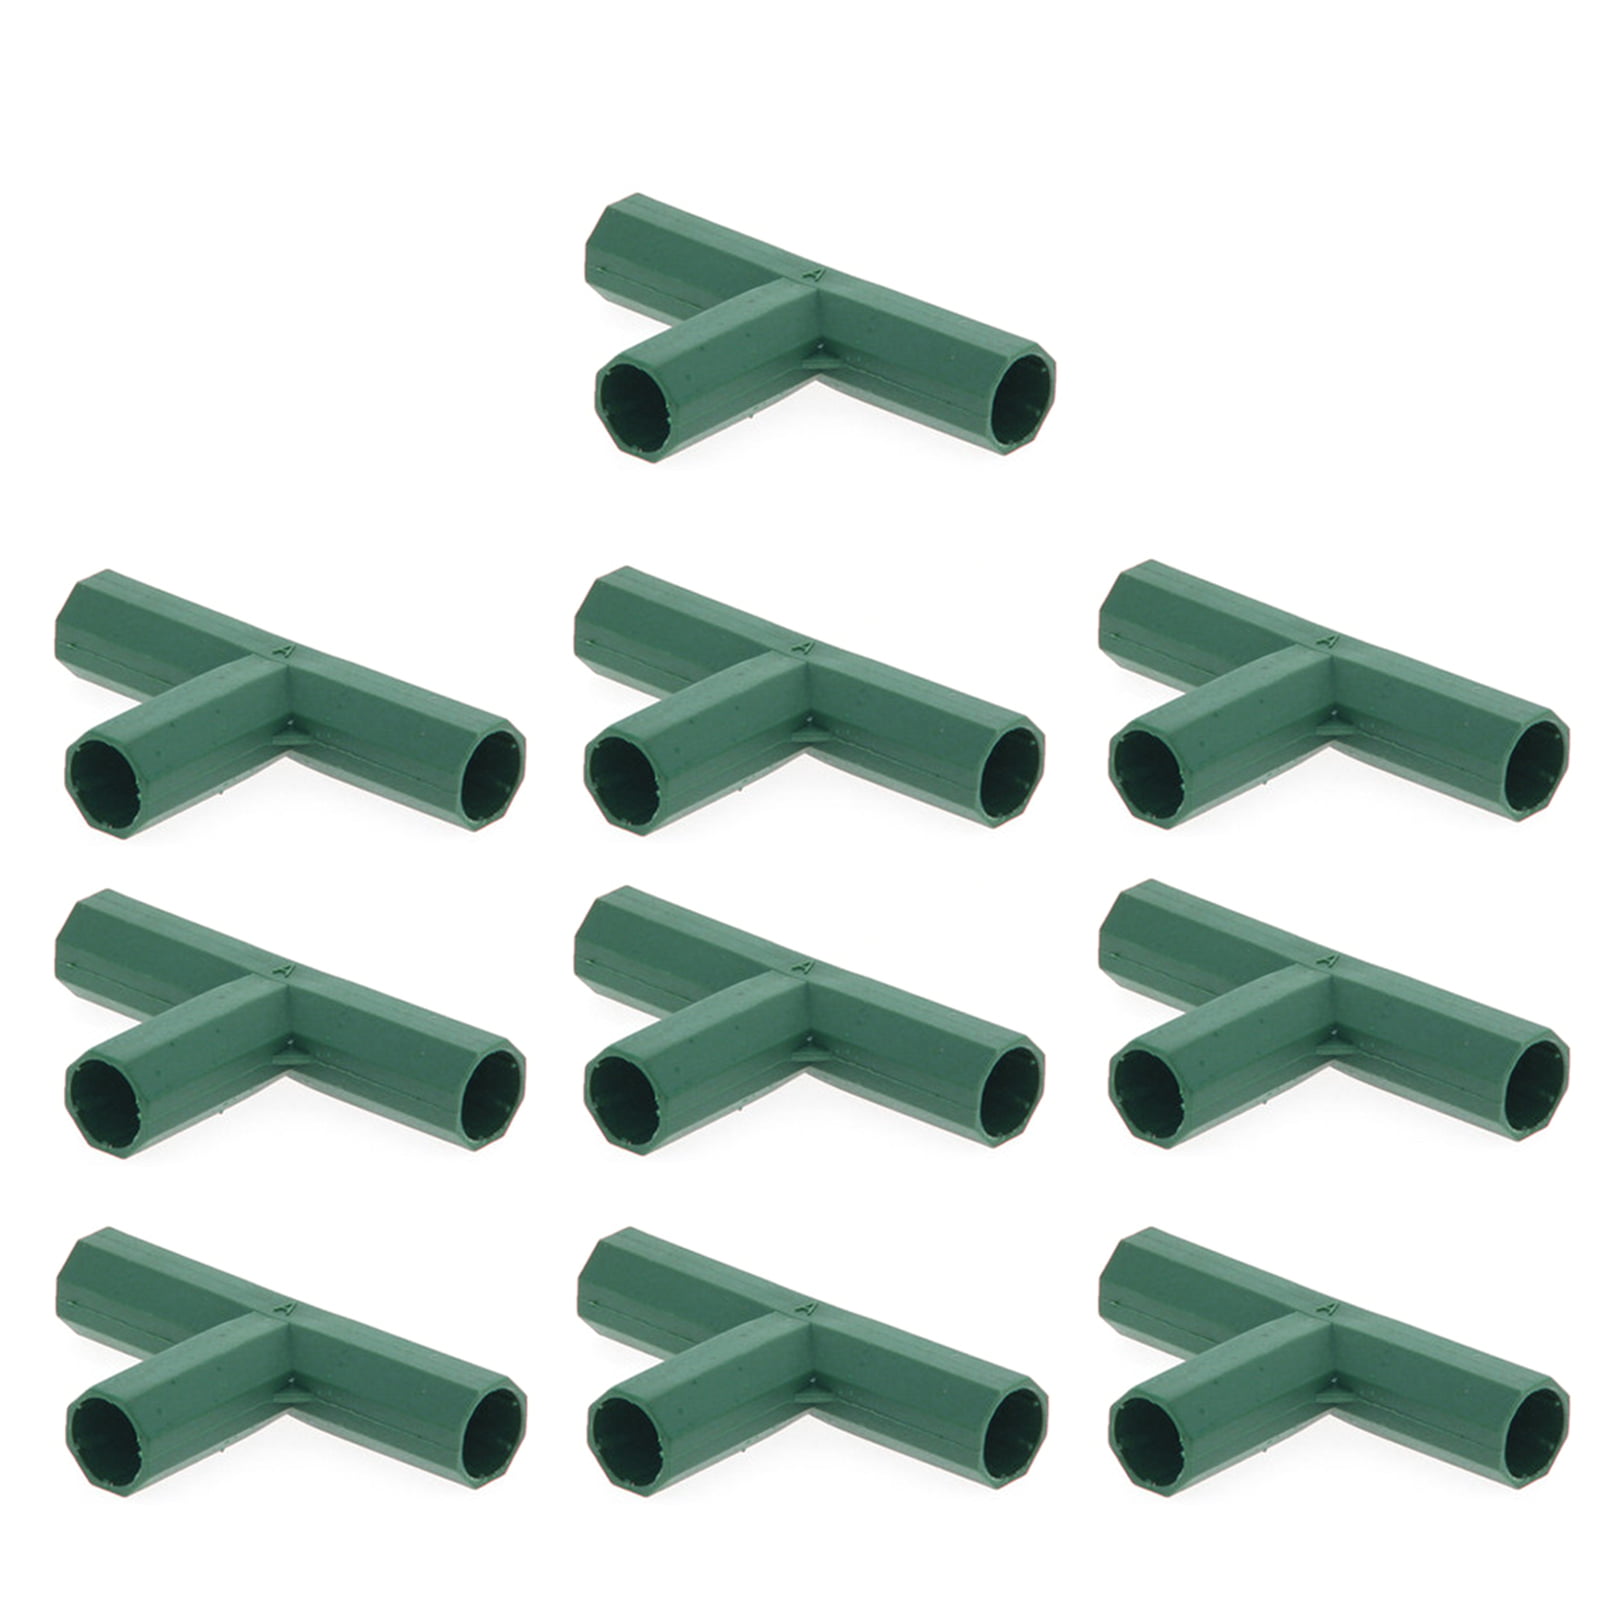 16MM PVC Fitting 5 Types Stable Support Heavy Duty Greenhouse Frame Buildin 